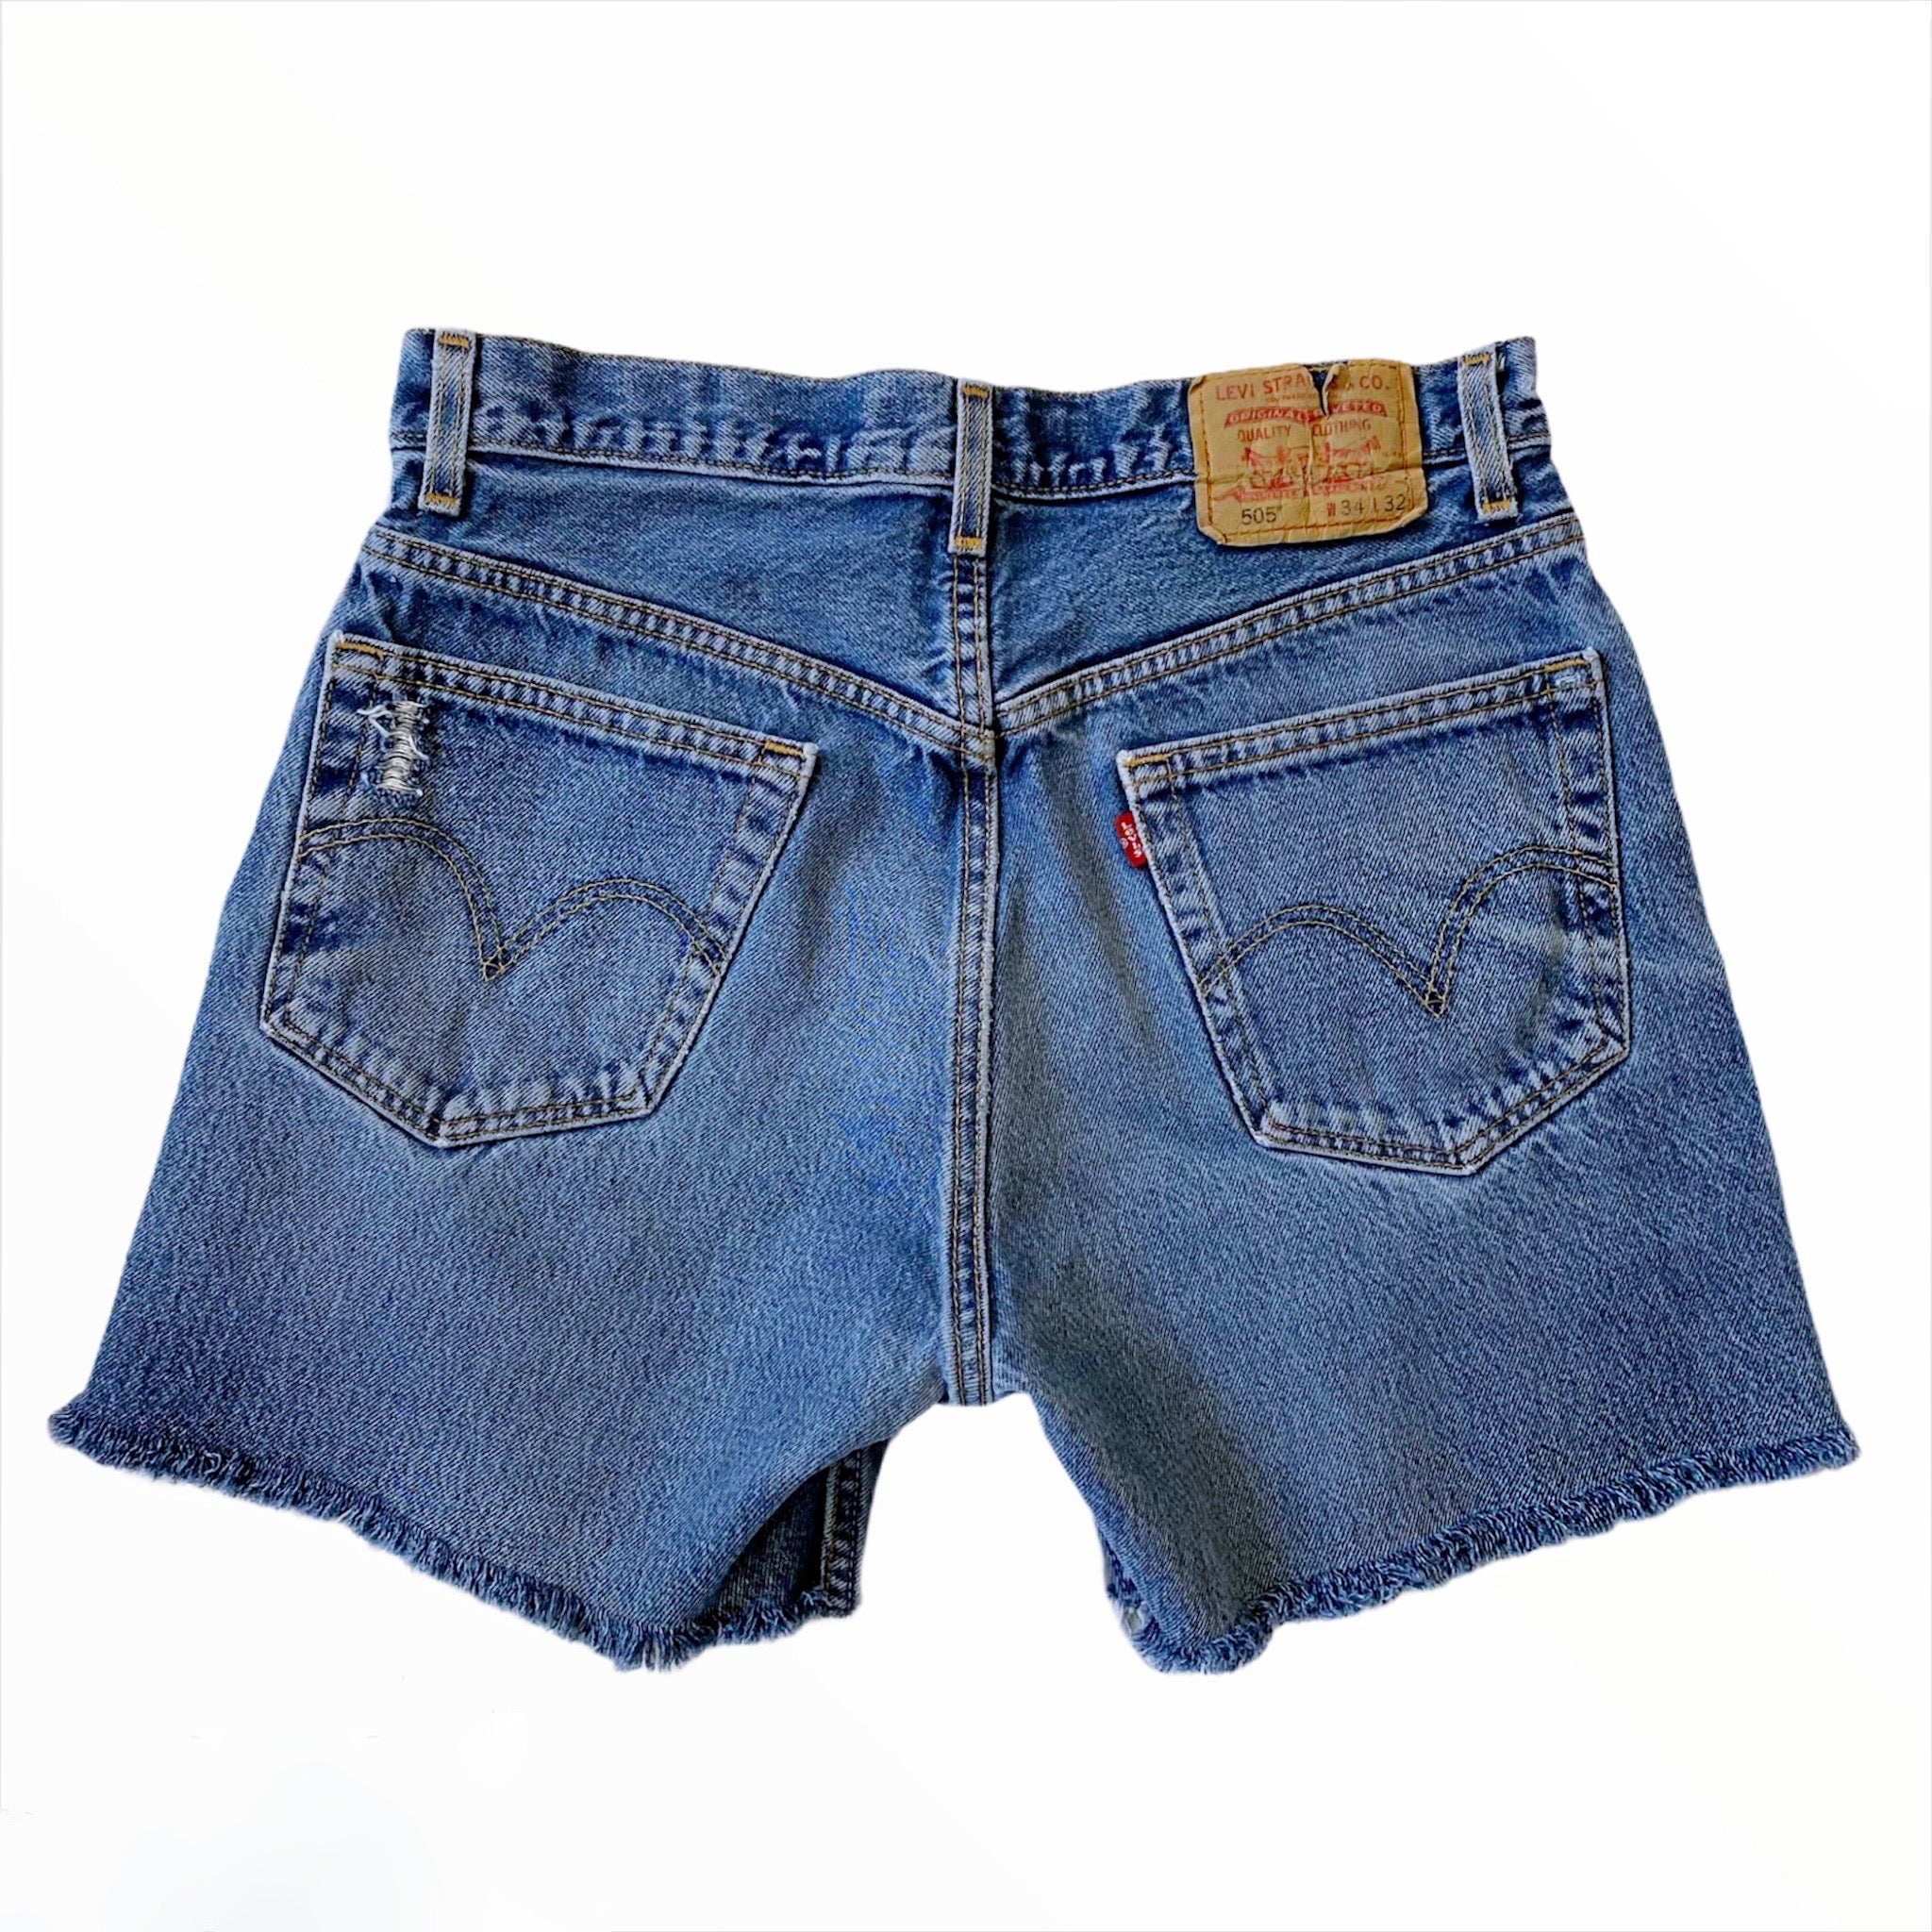 Made To Order Distressed Denim Shorts